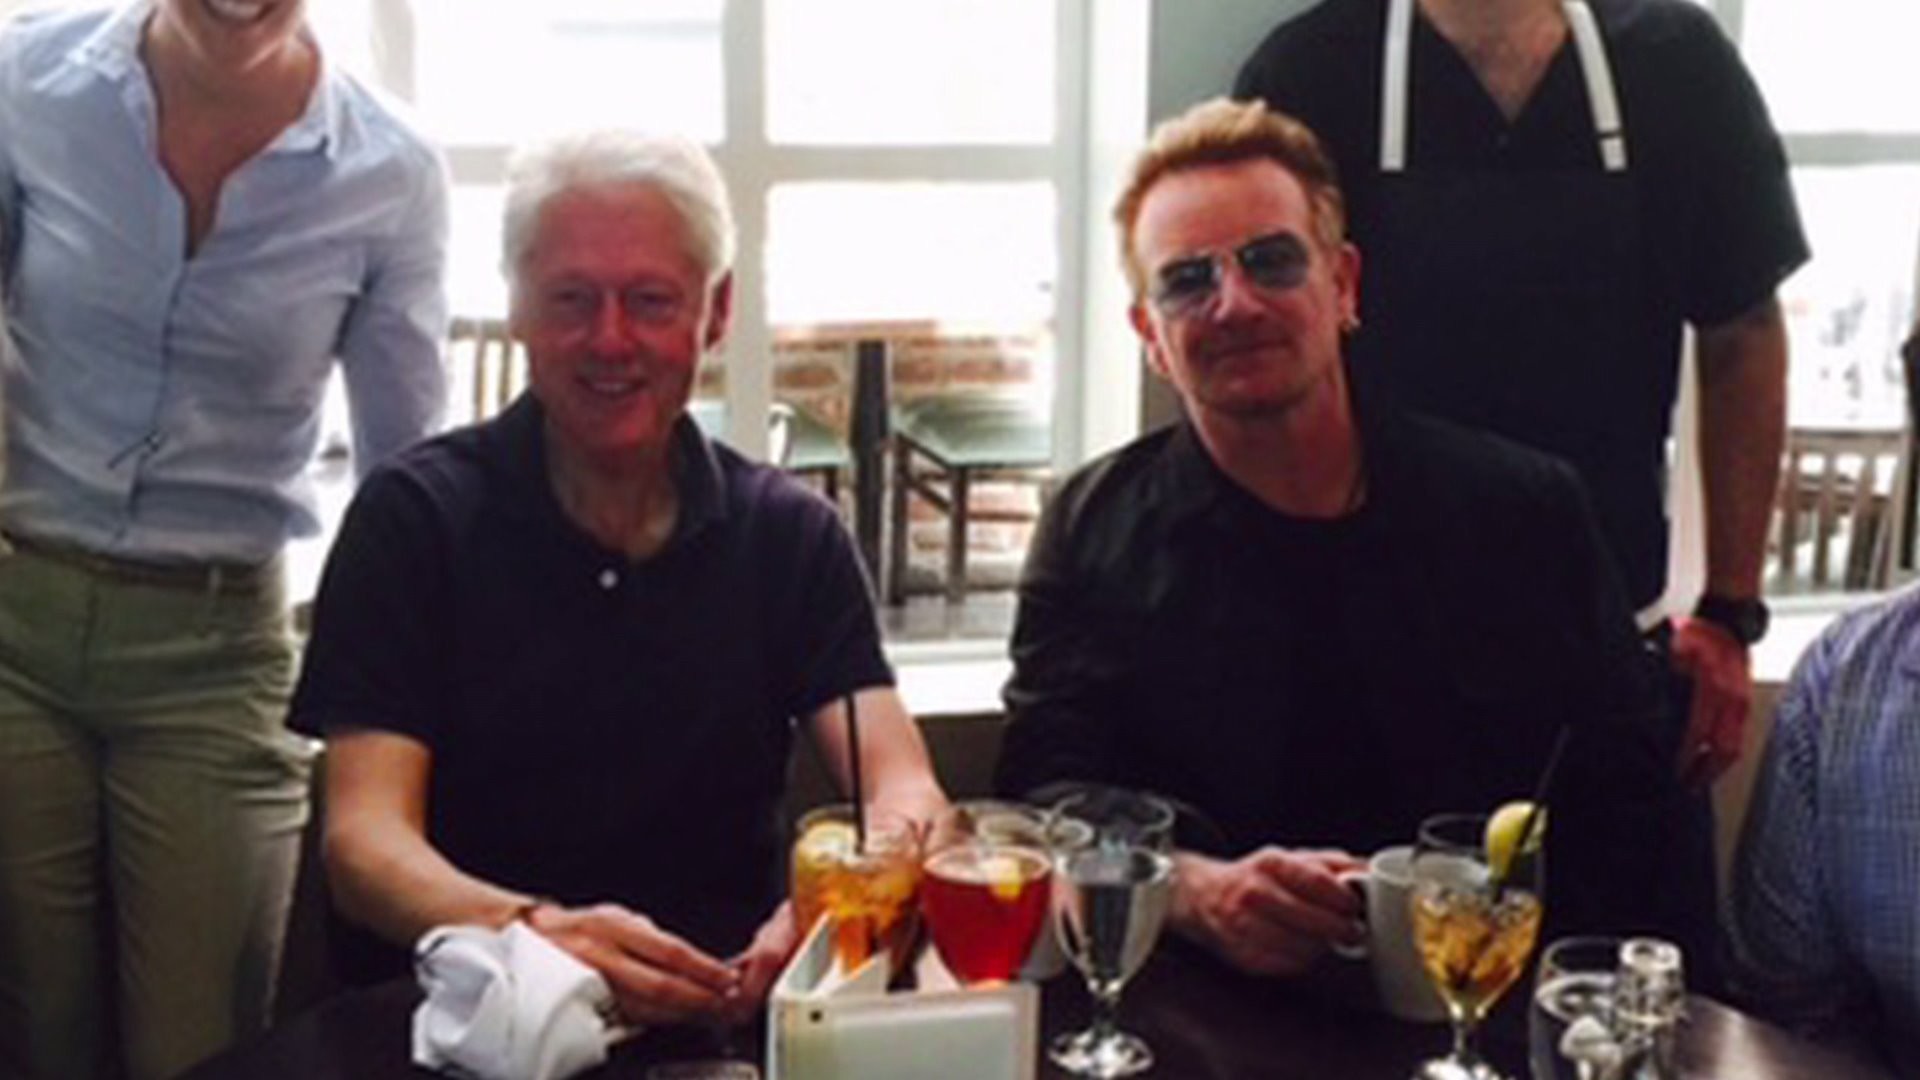 1920x1080 Bill Clinton and Bono have lunch in Denver